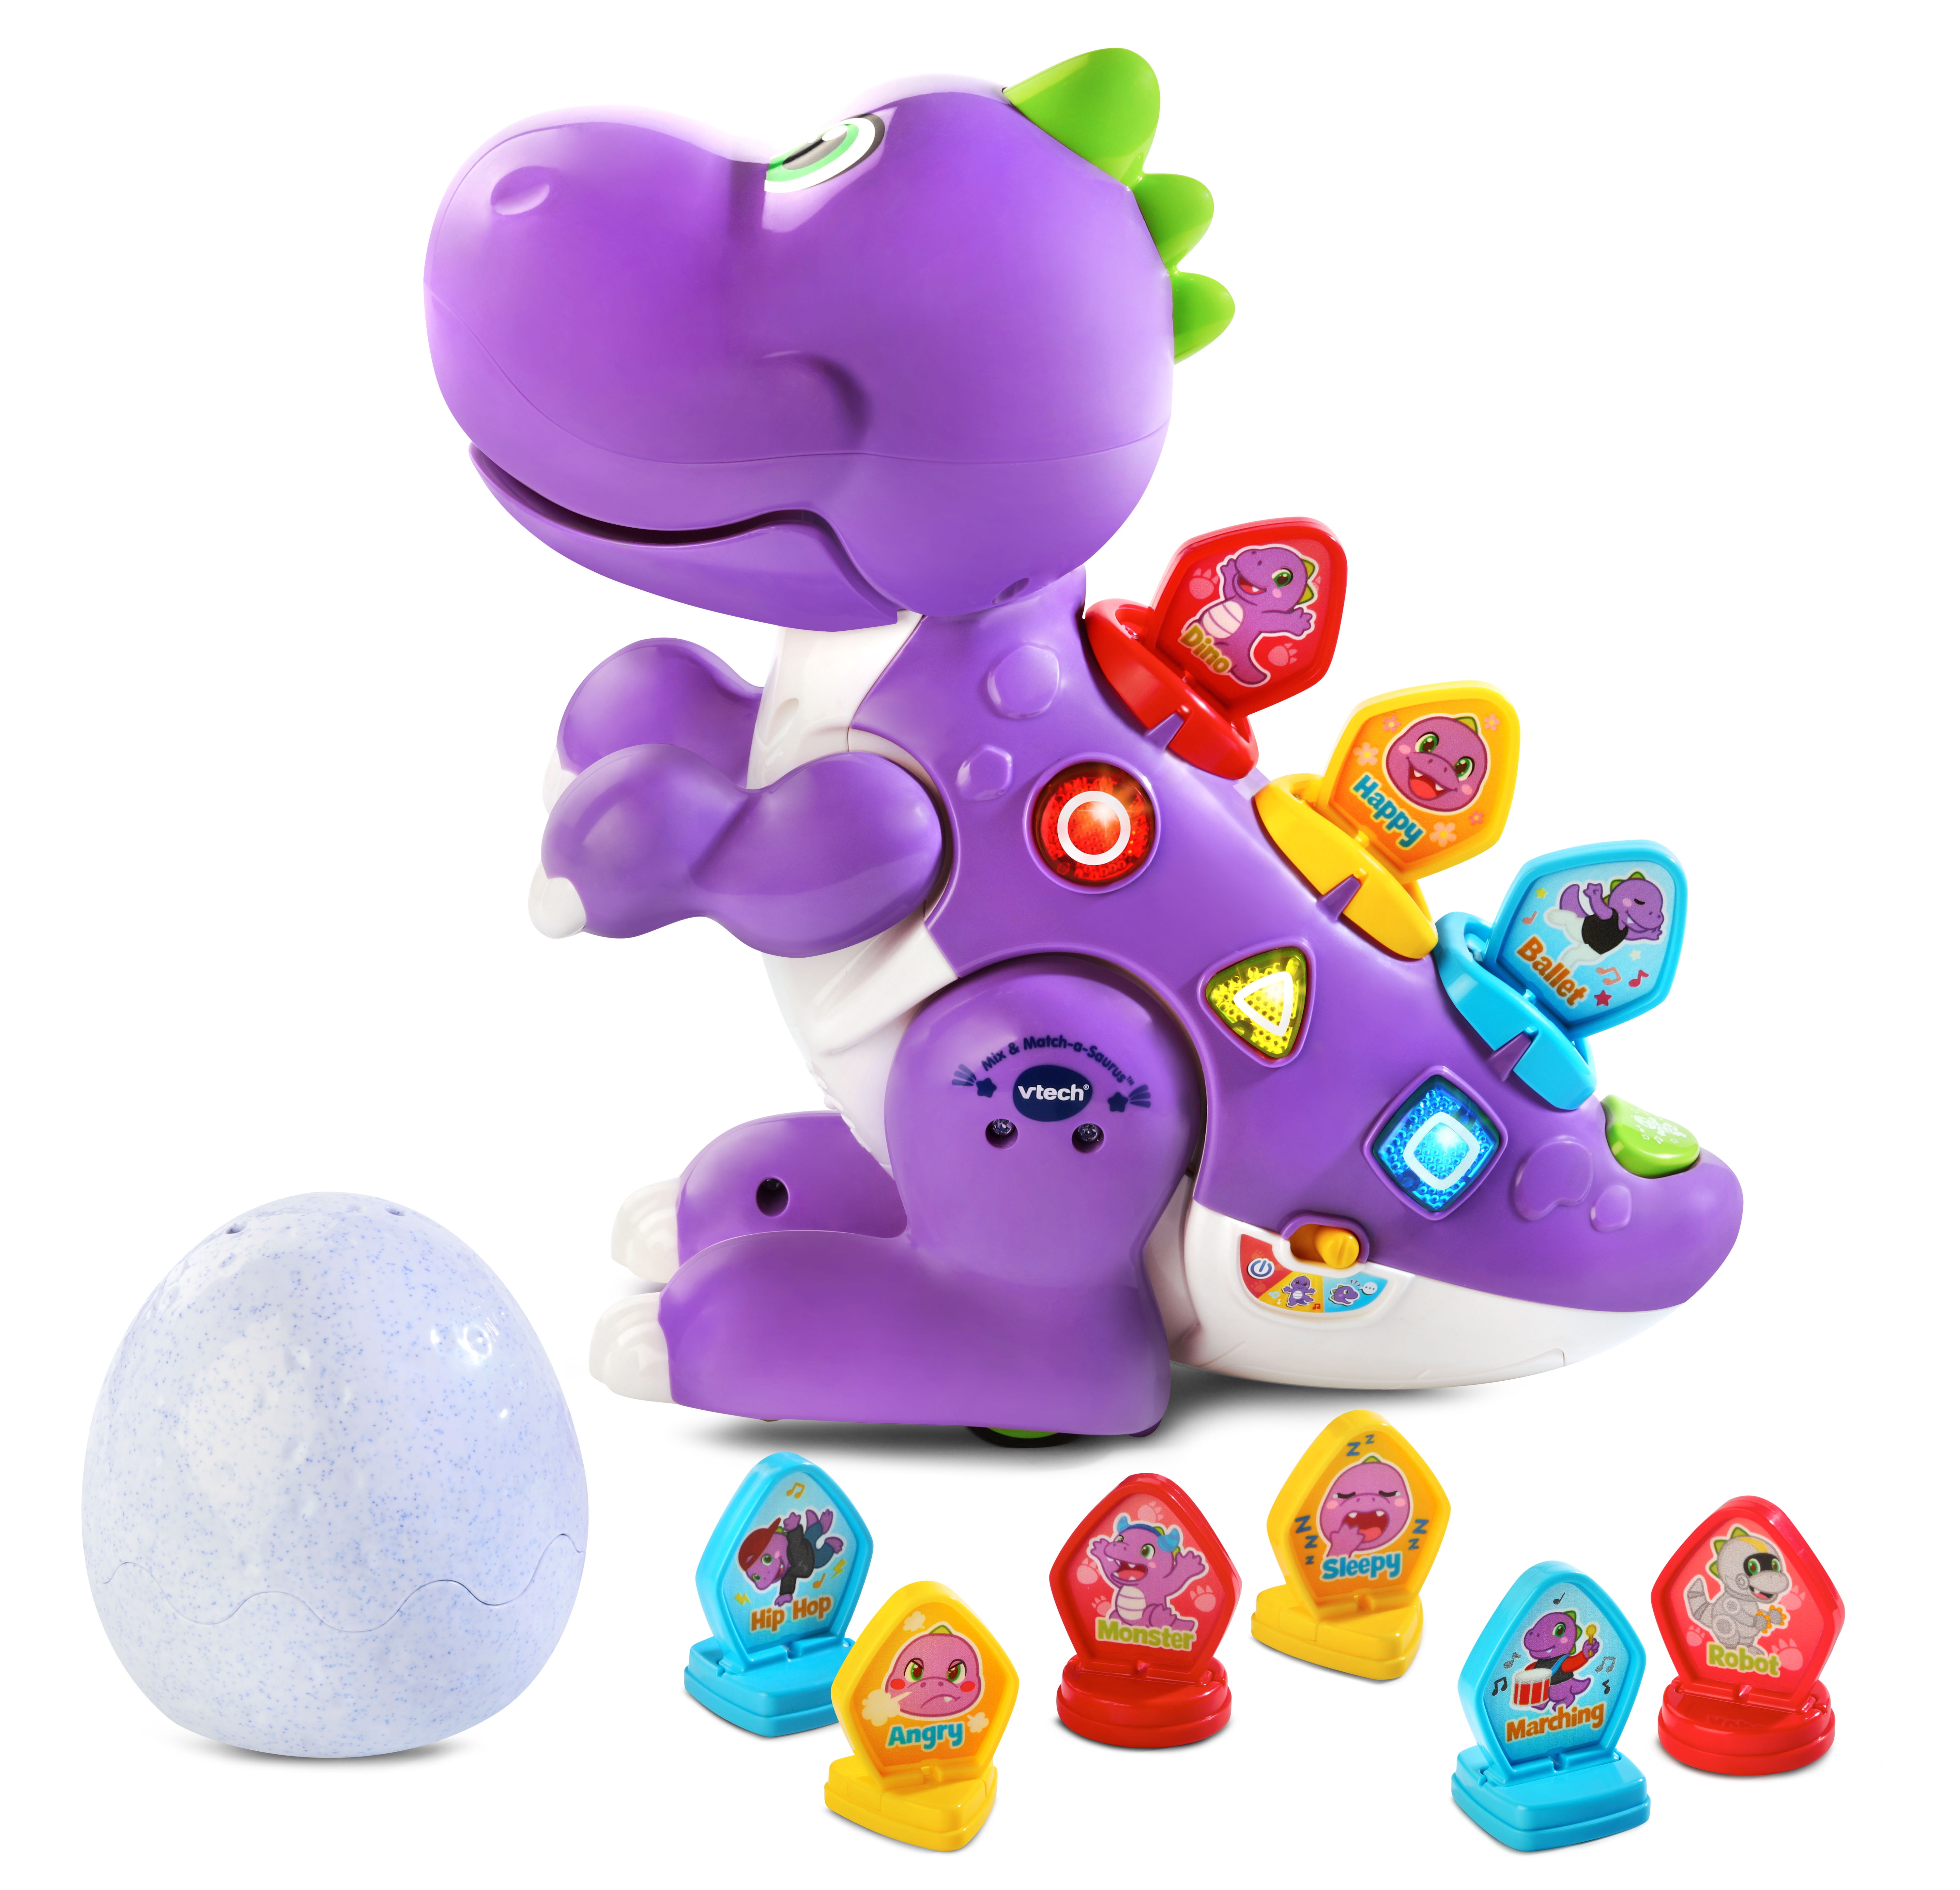 VTech Learn and Dance Dino Purple Dinosaur Baby Kids Educational Toy Gift 2 for sale online 